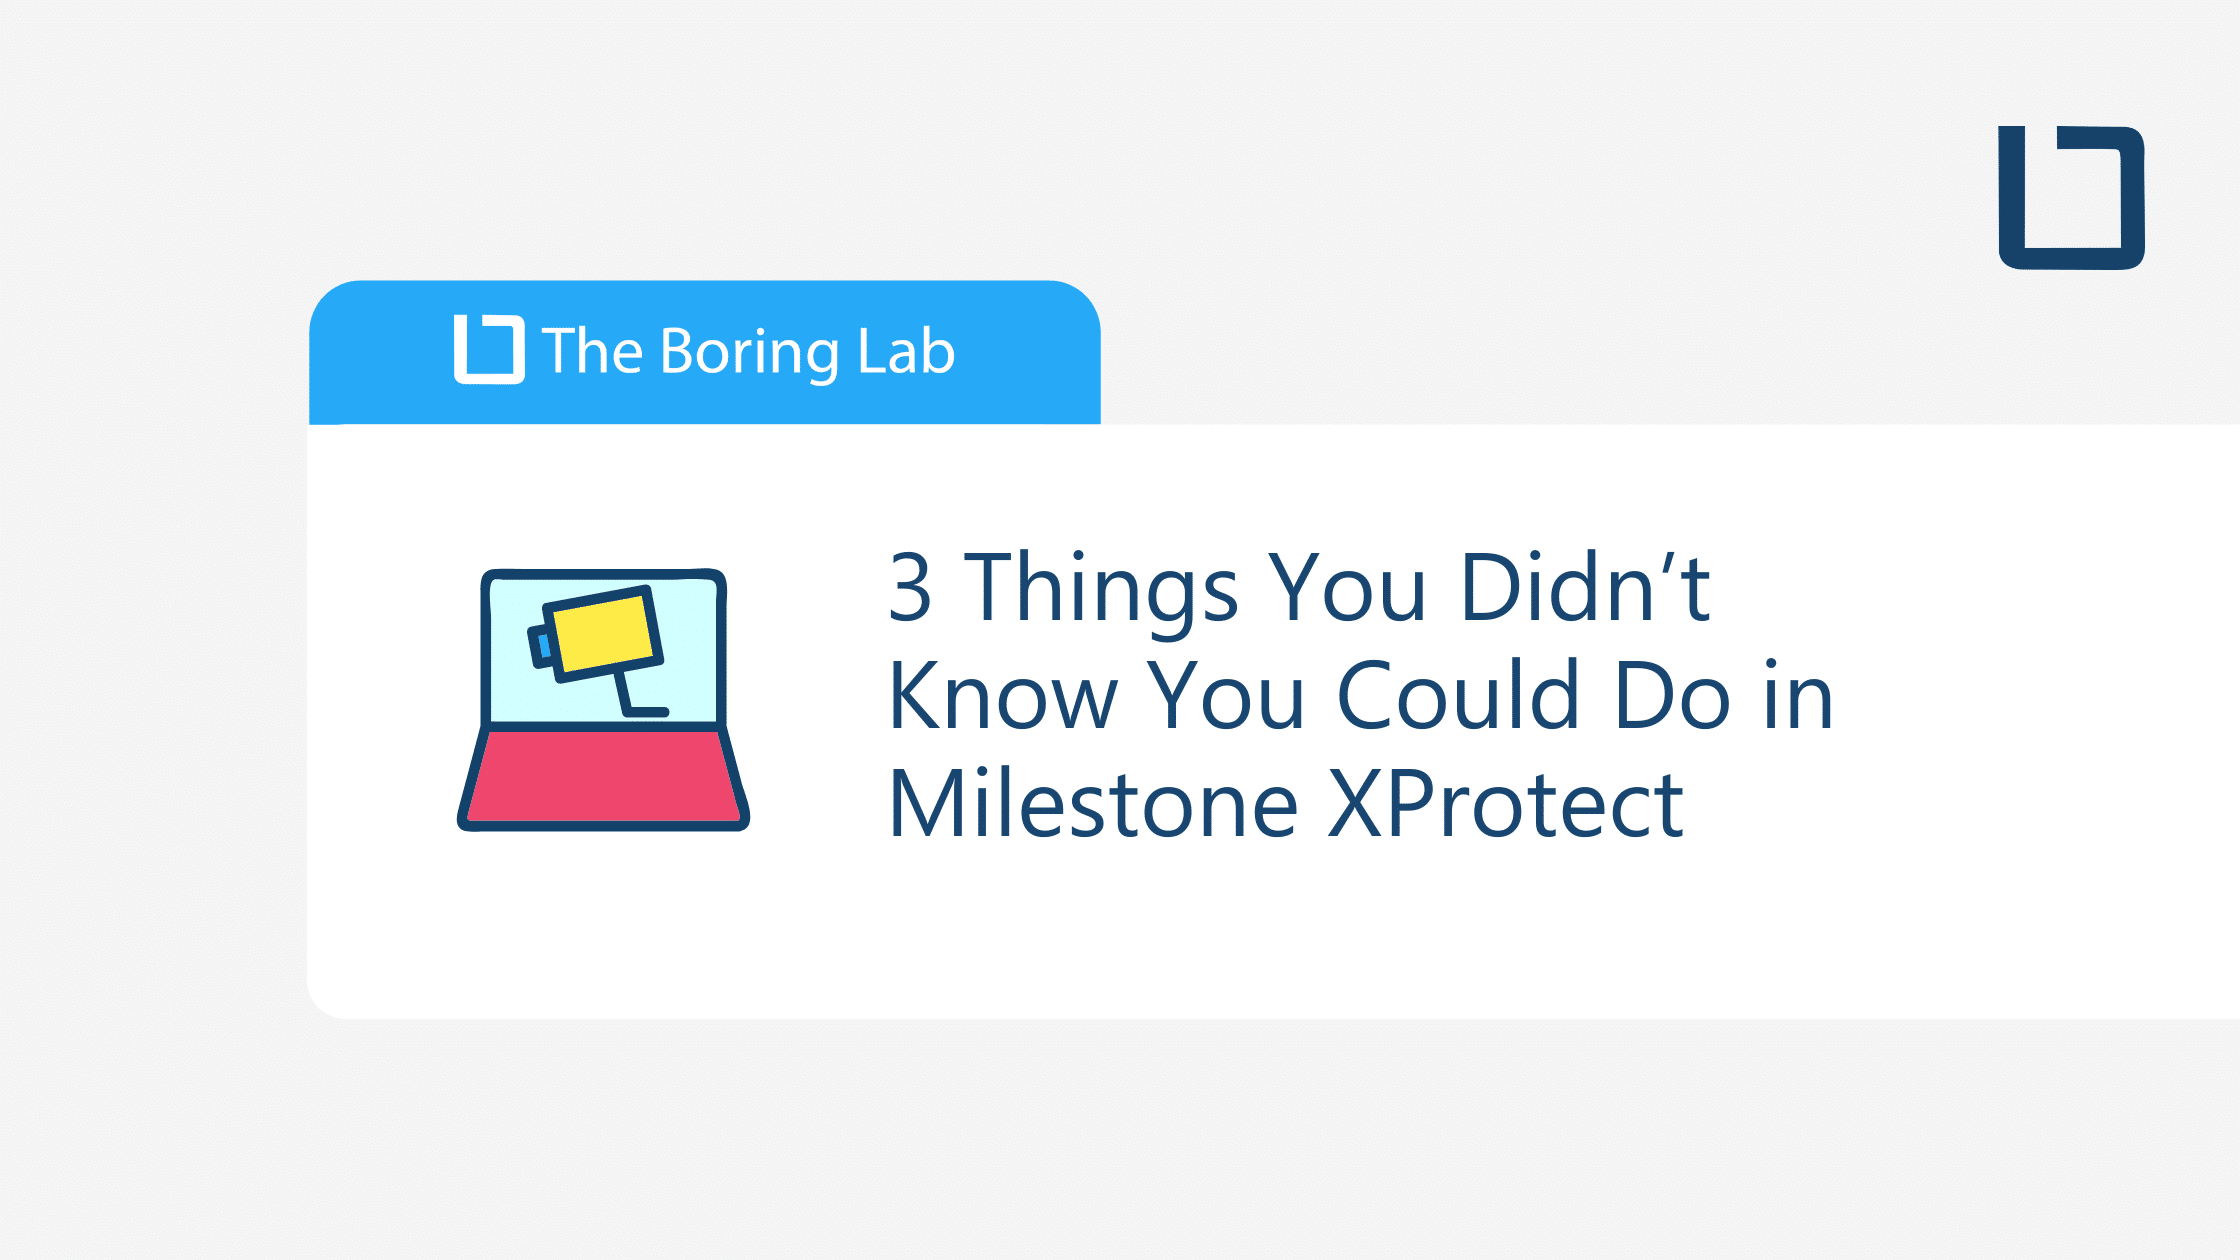 3 Things You Didn’t Know You Could Do in Milestone XProtect (2021)